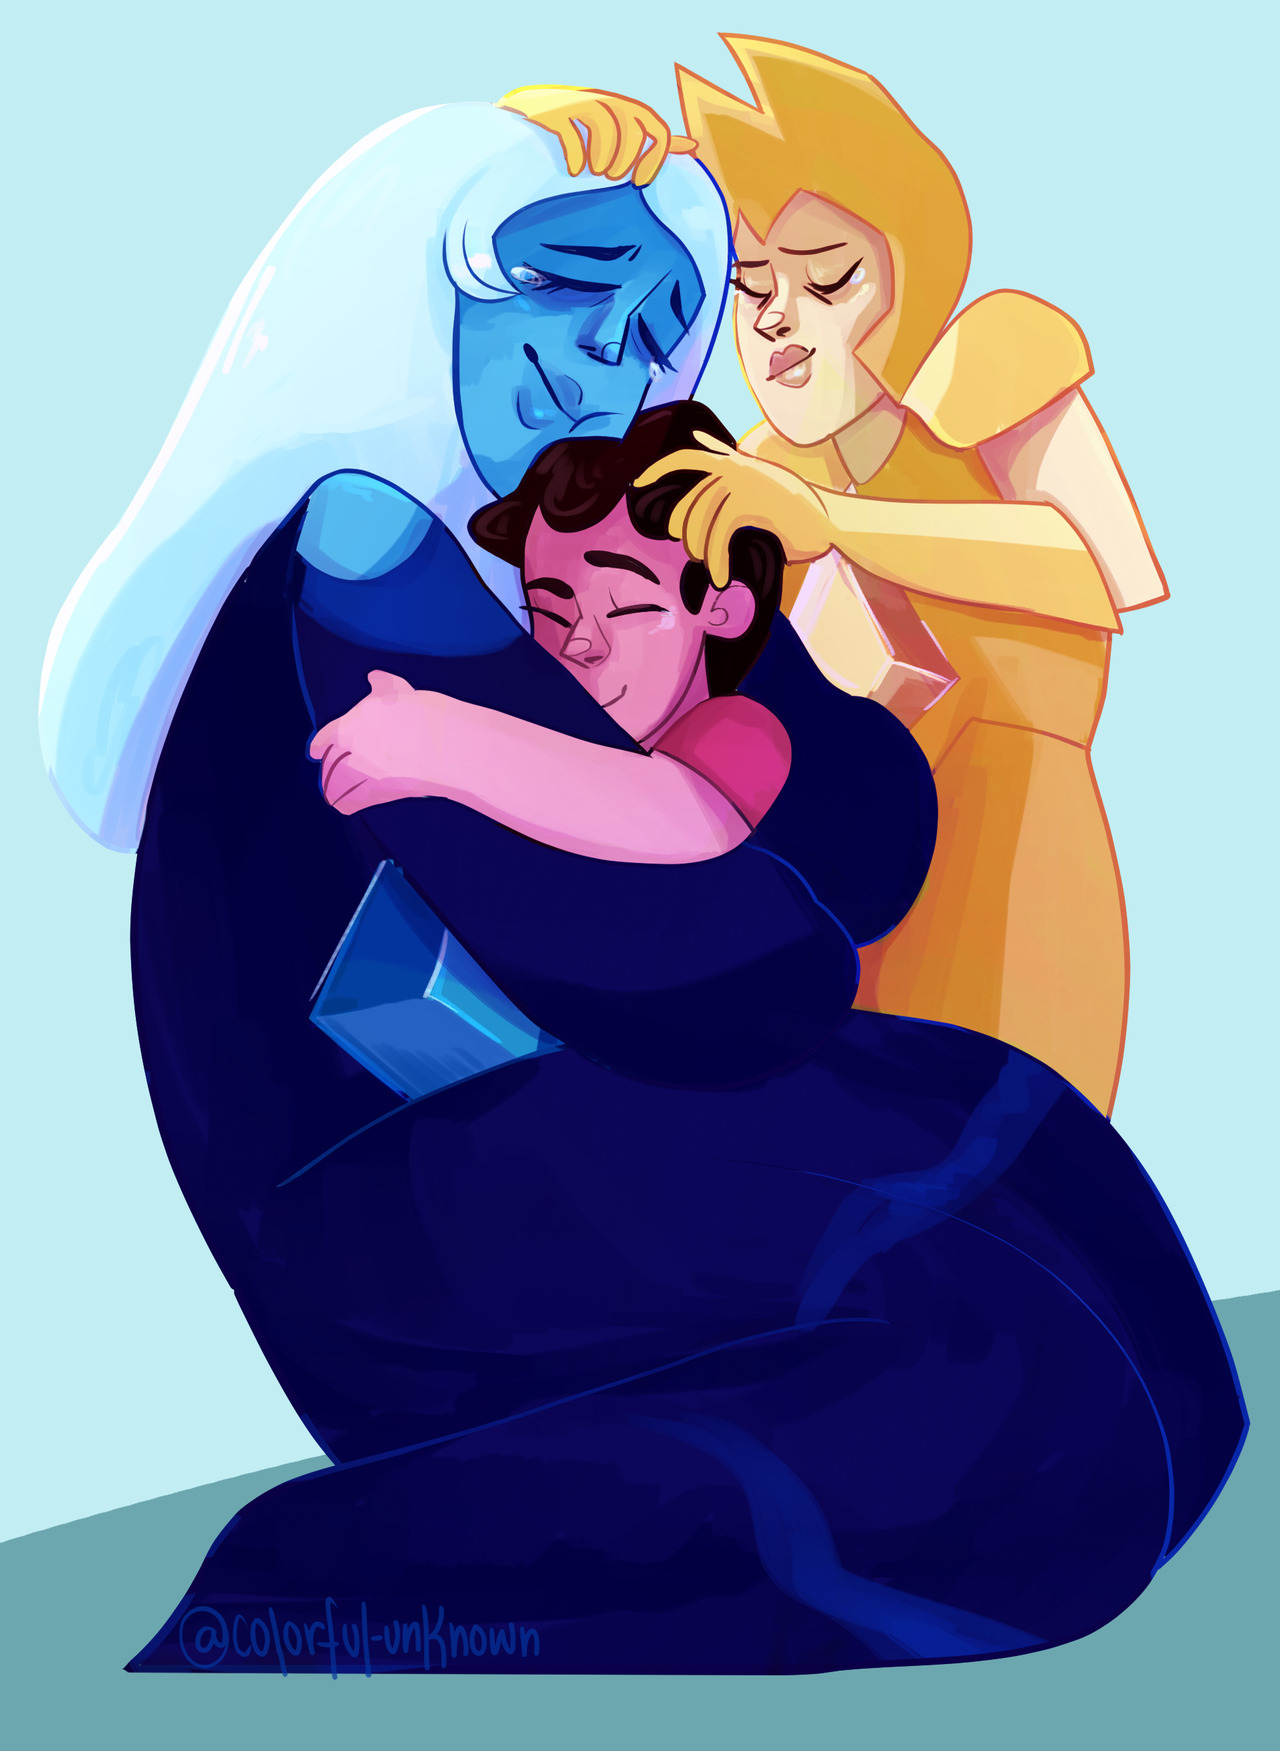 you have unlocked blue mom and yellow mom